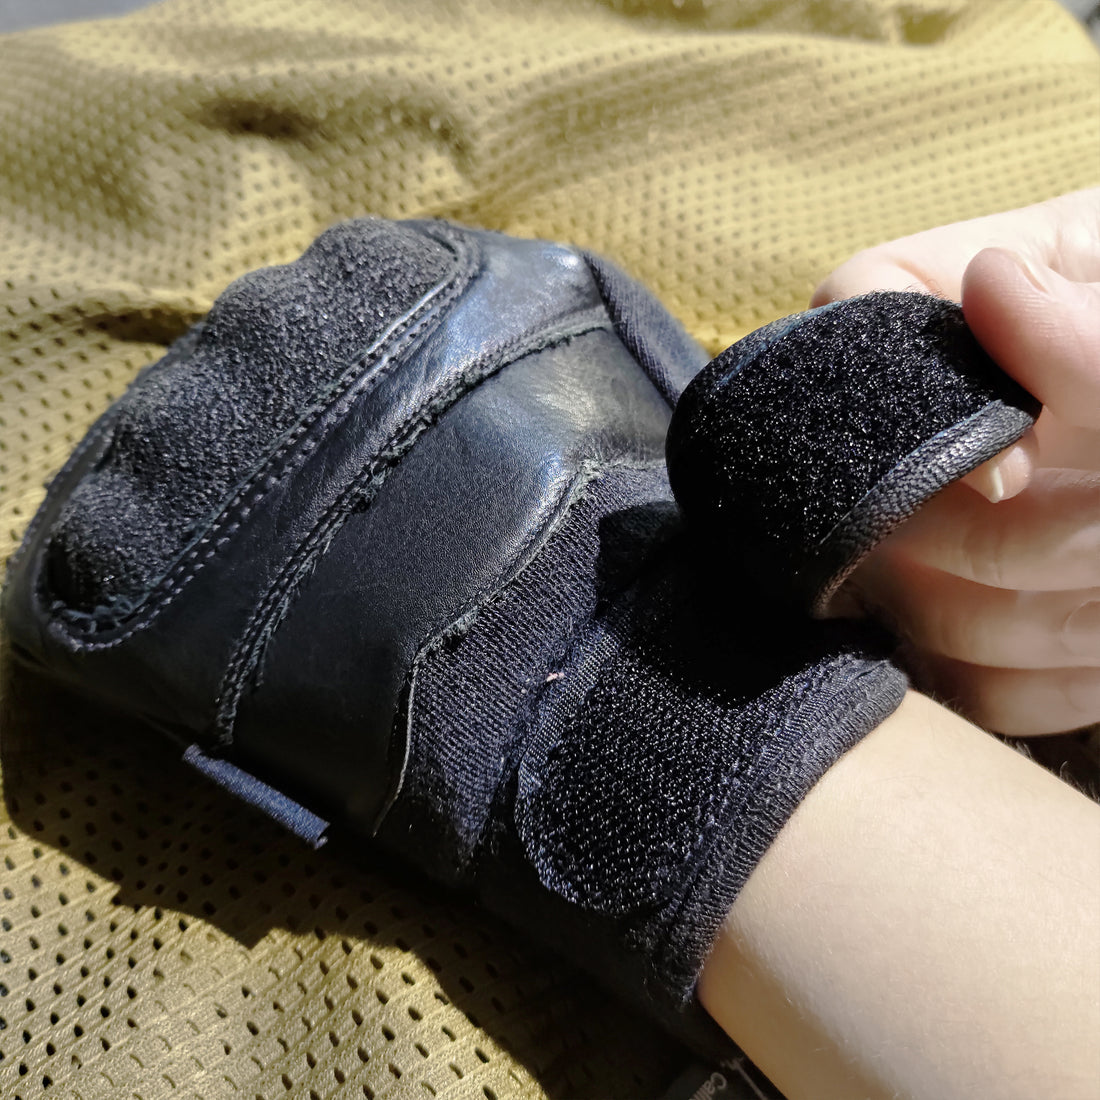 How to choose your tactical gloves